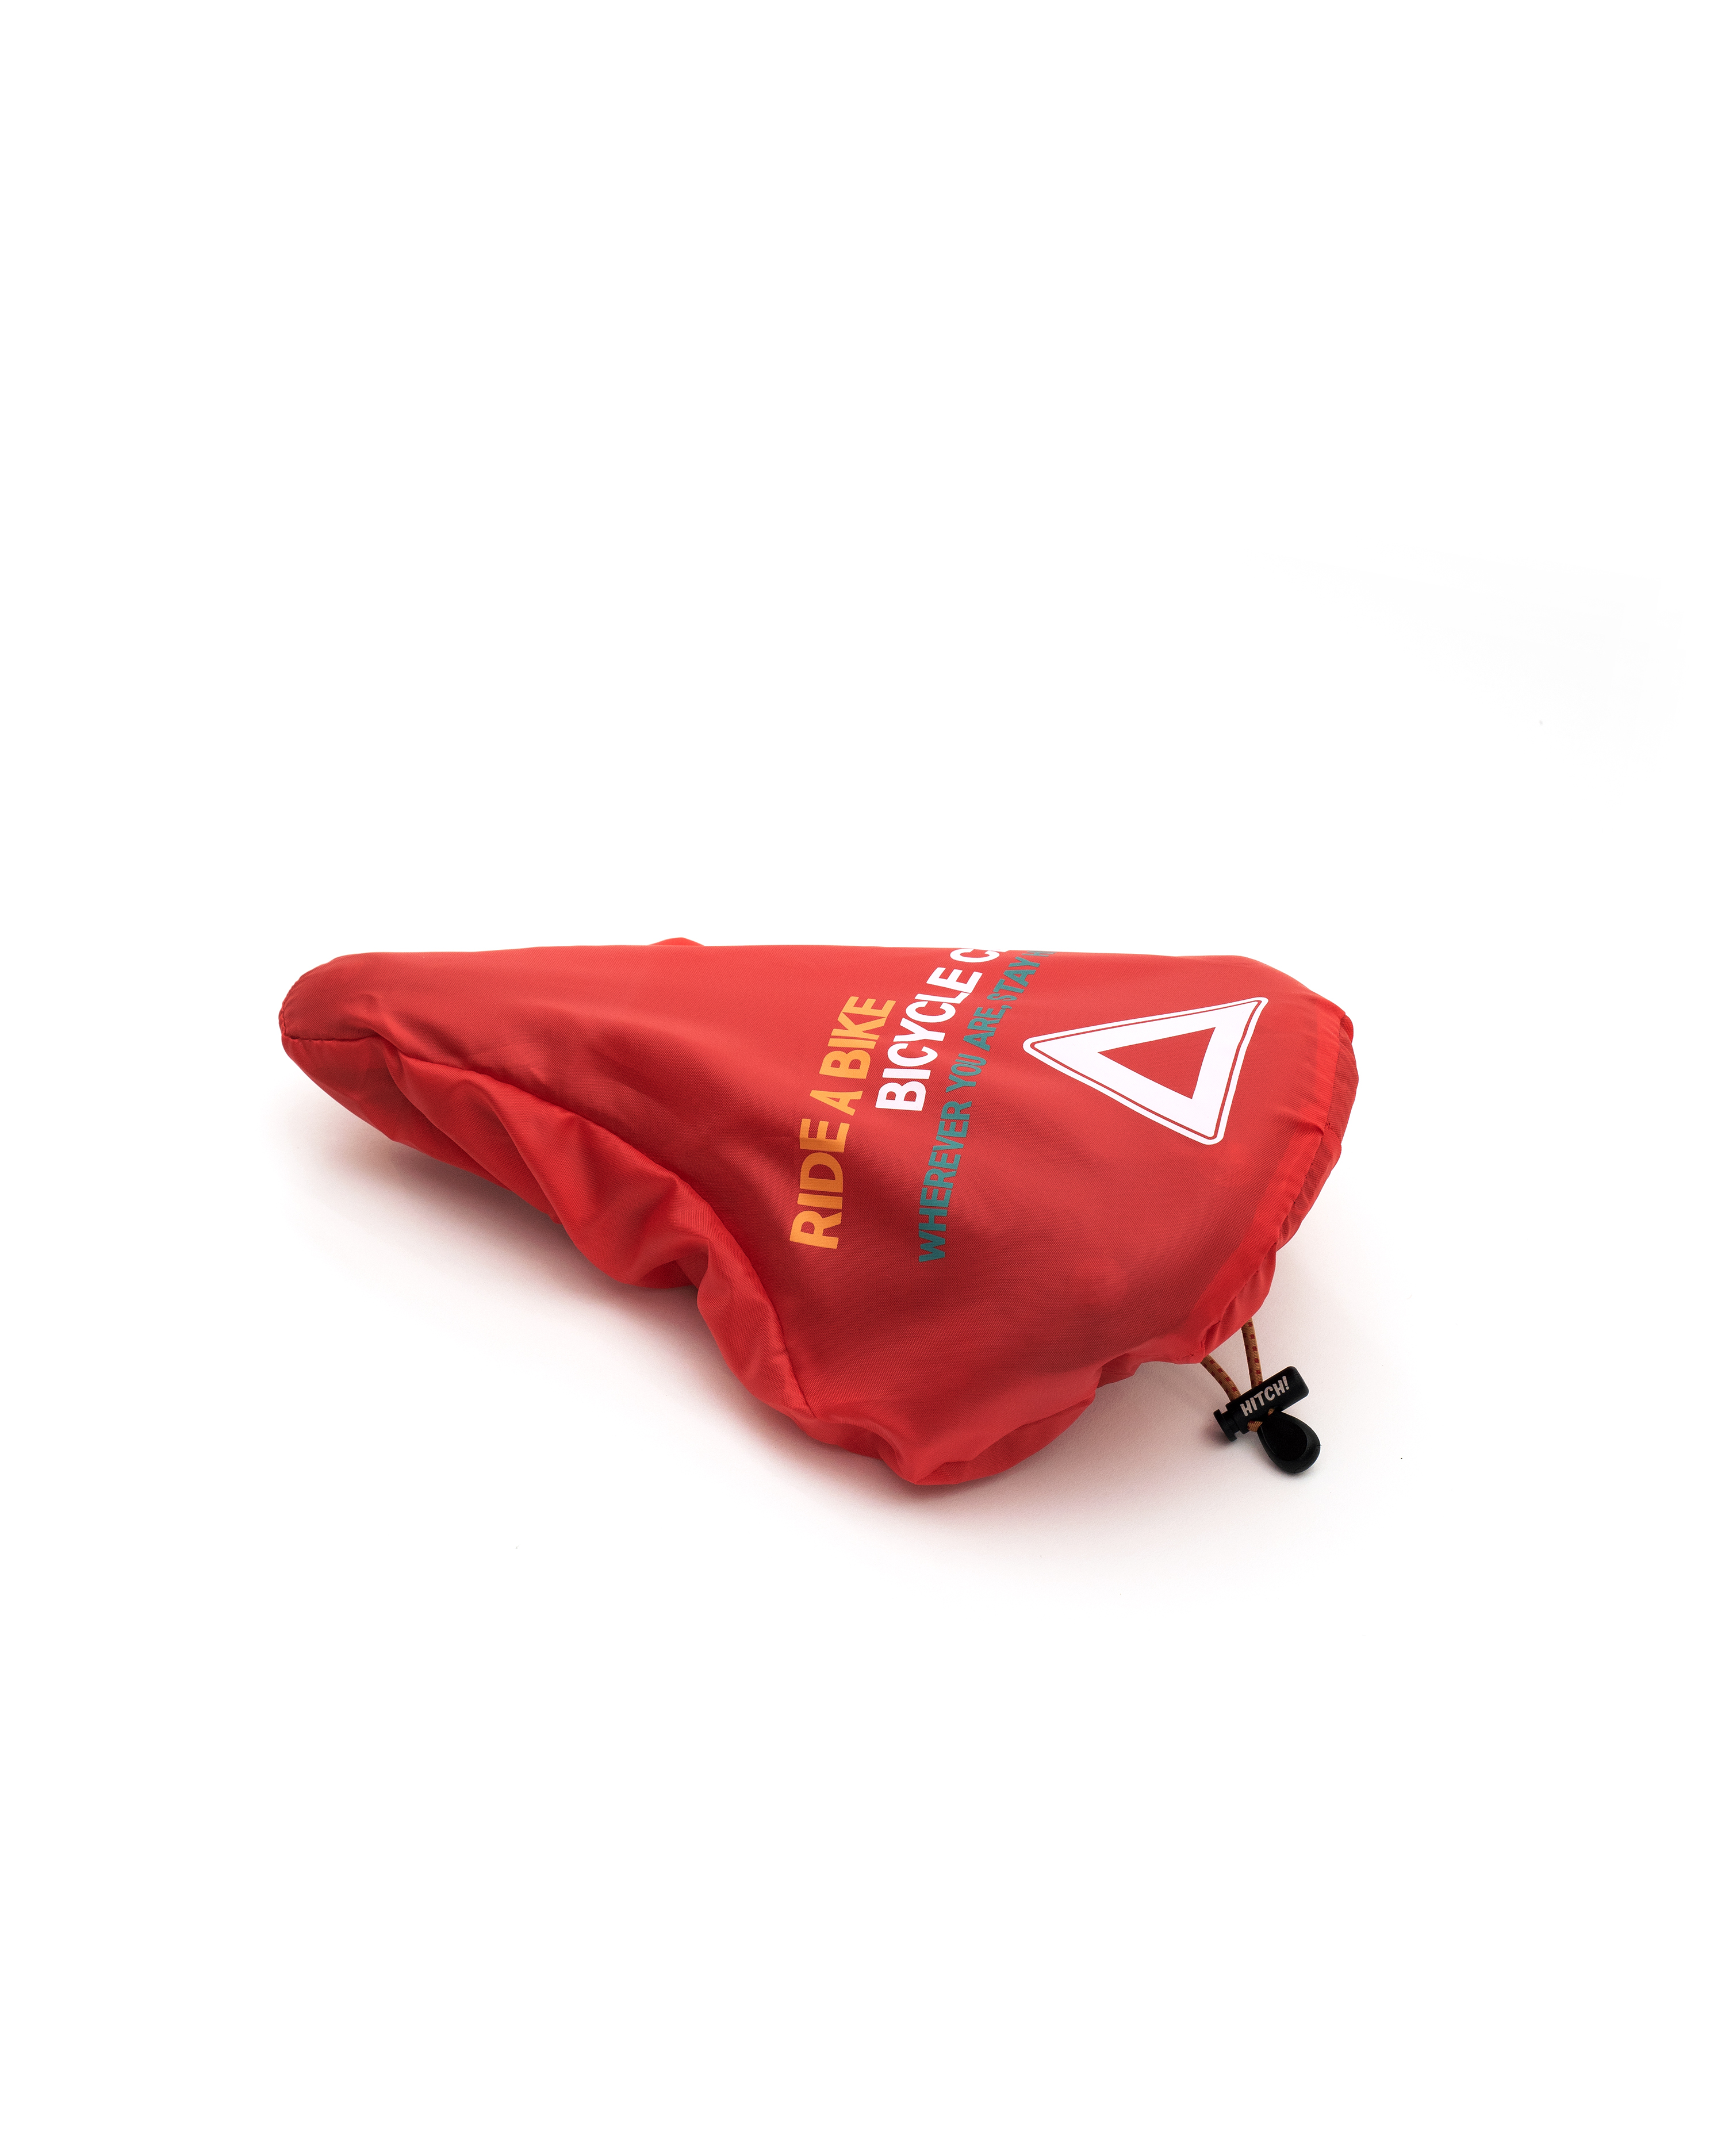 saddle cover - red